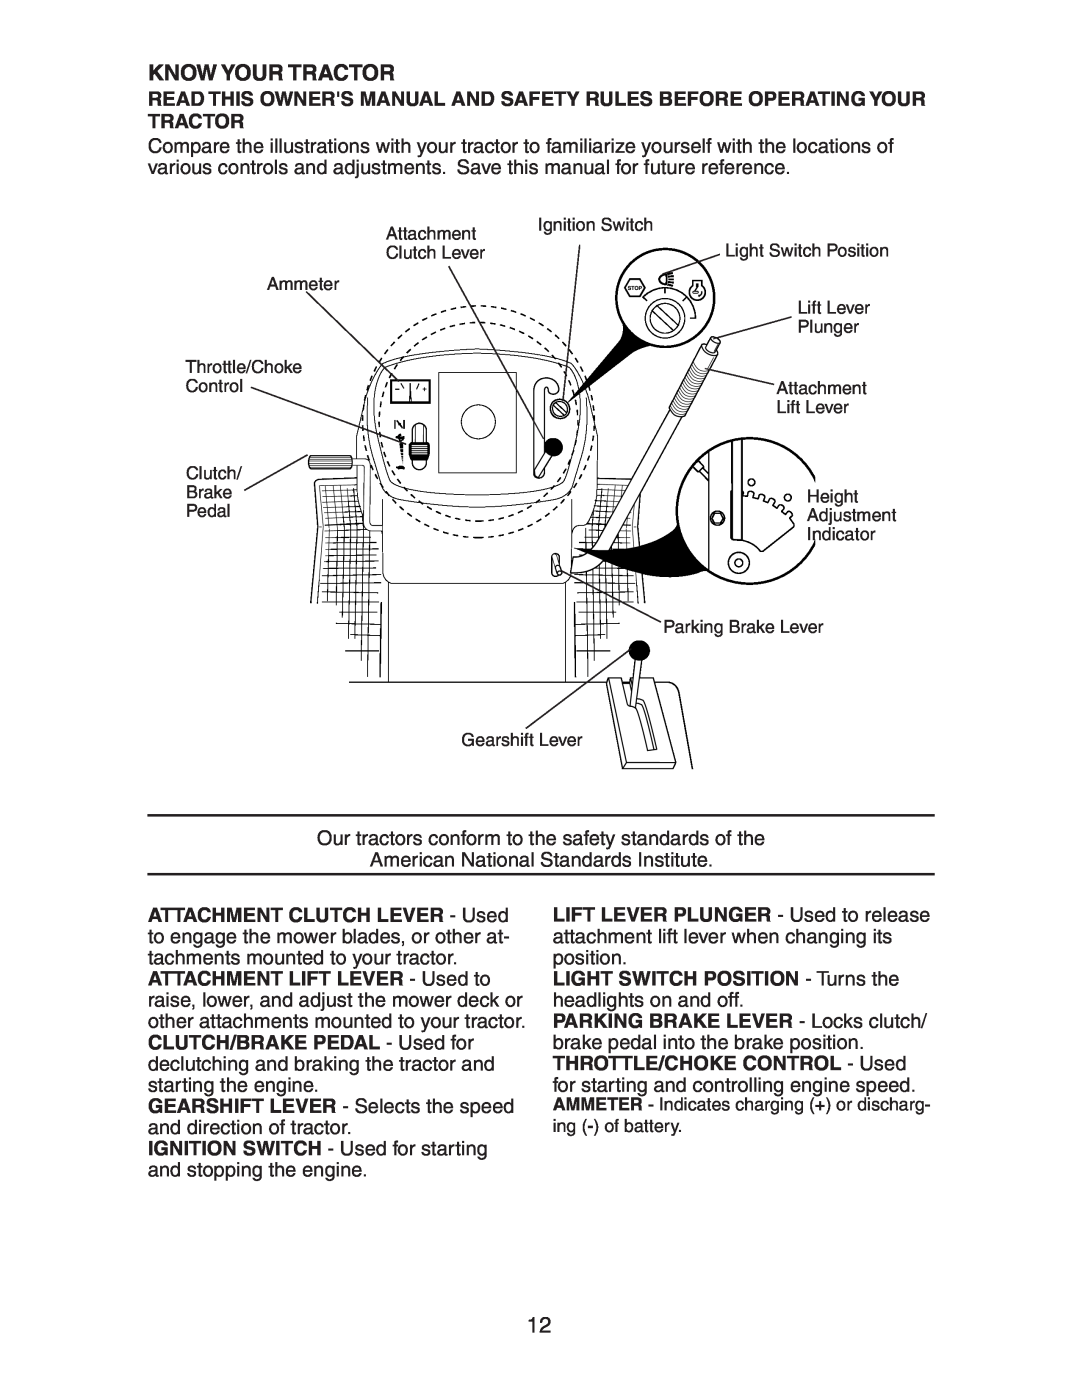 Poulan AG17542STB manual Know Your Tractor, LIGHT SWITCH POSITION - Turns the headlights on and off 